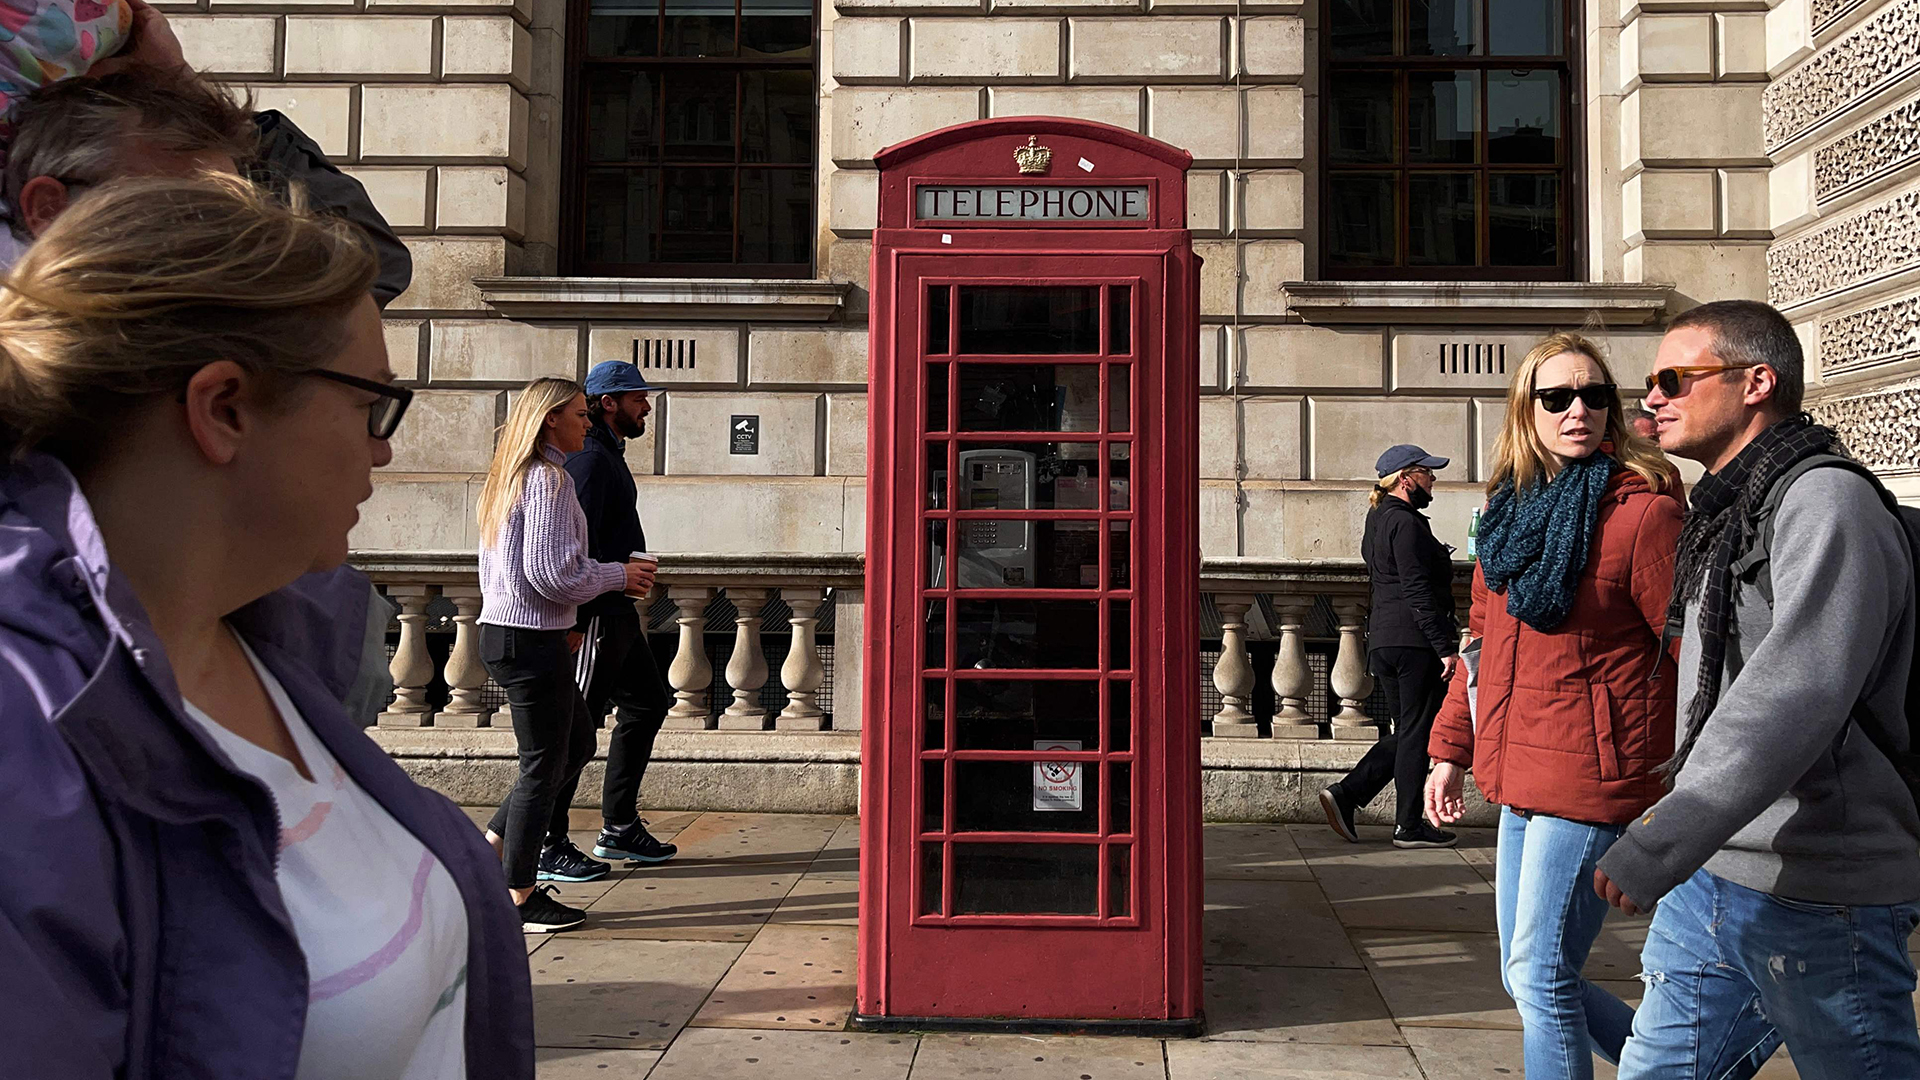 UK phone booths: 52 calls – otherwise they’re threatened with cancellation